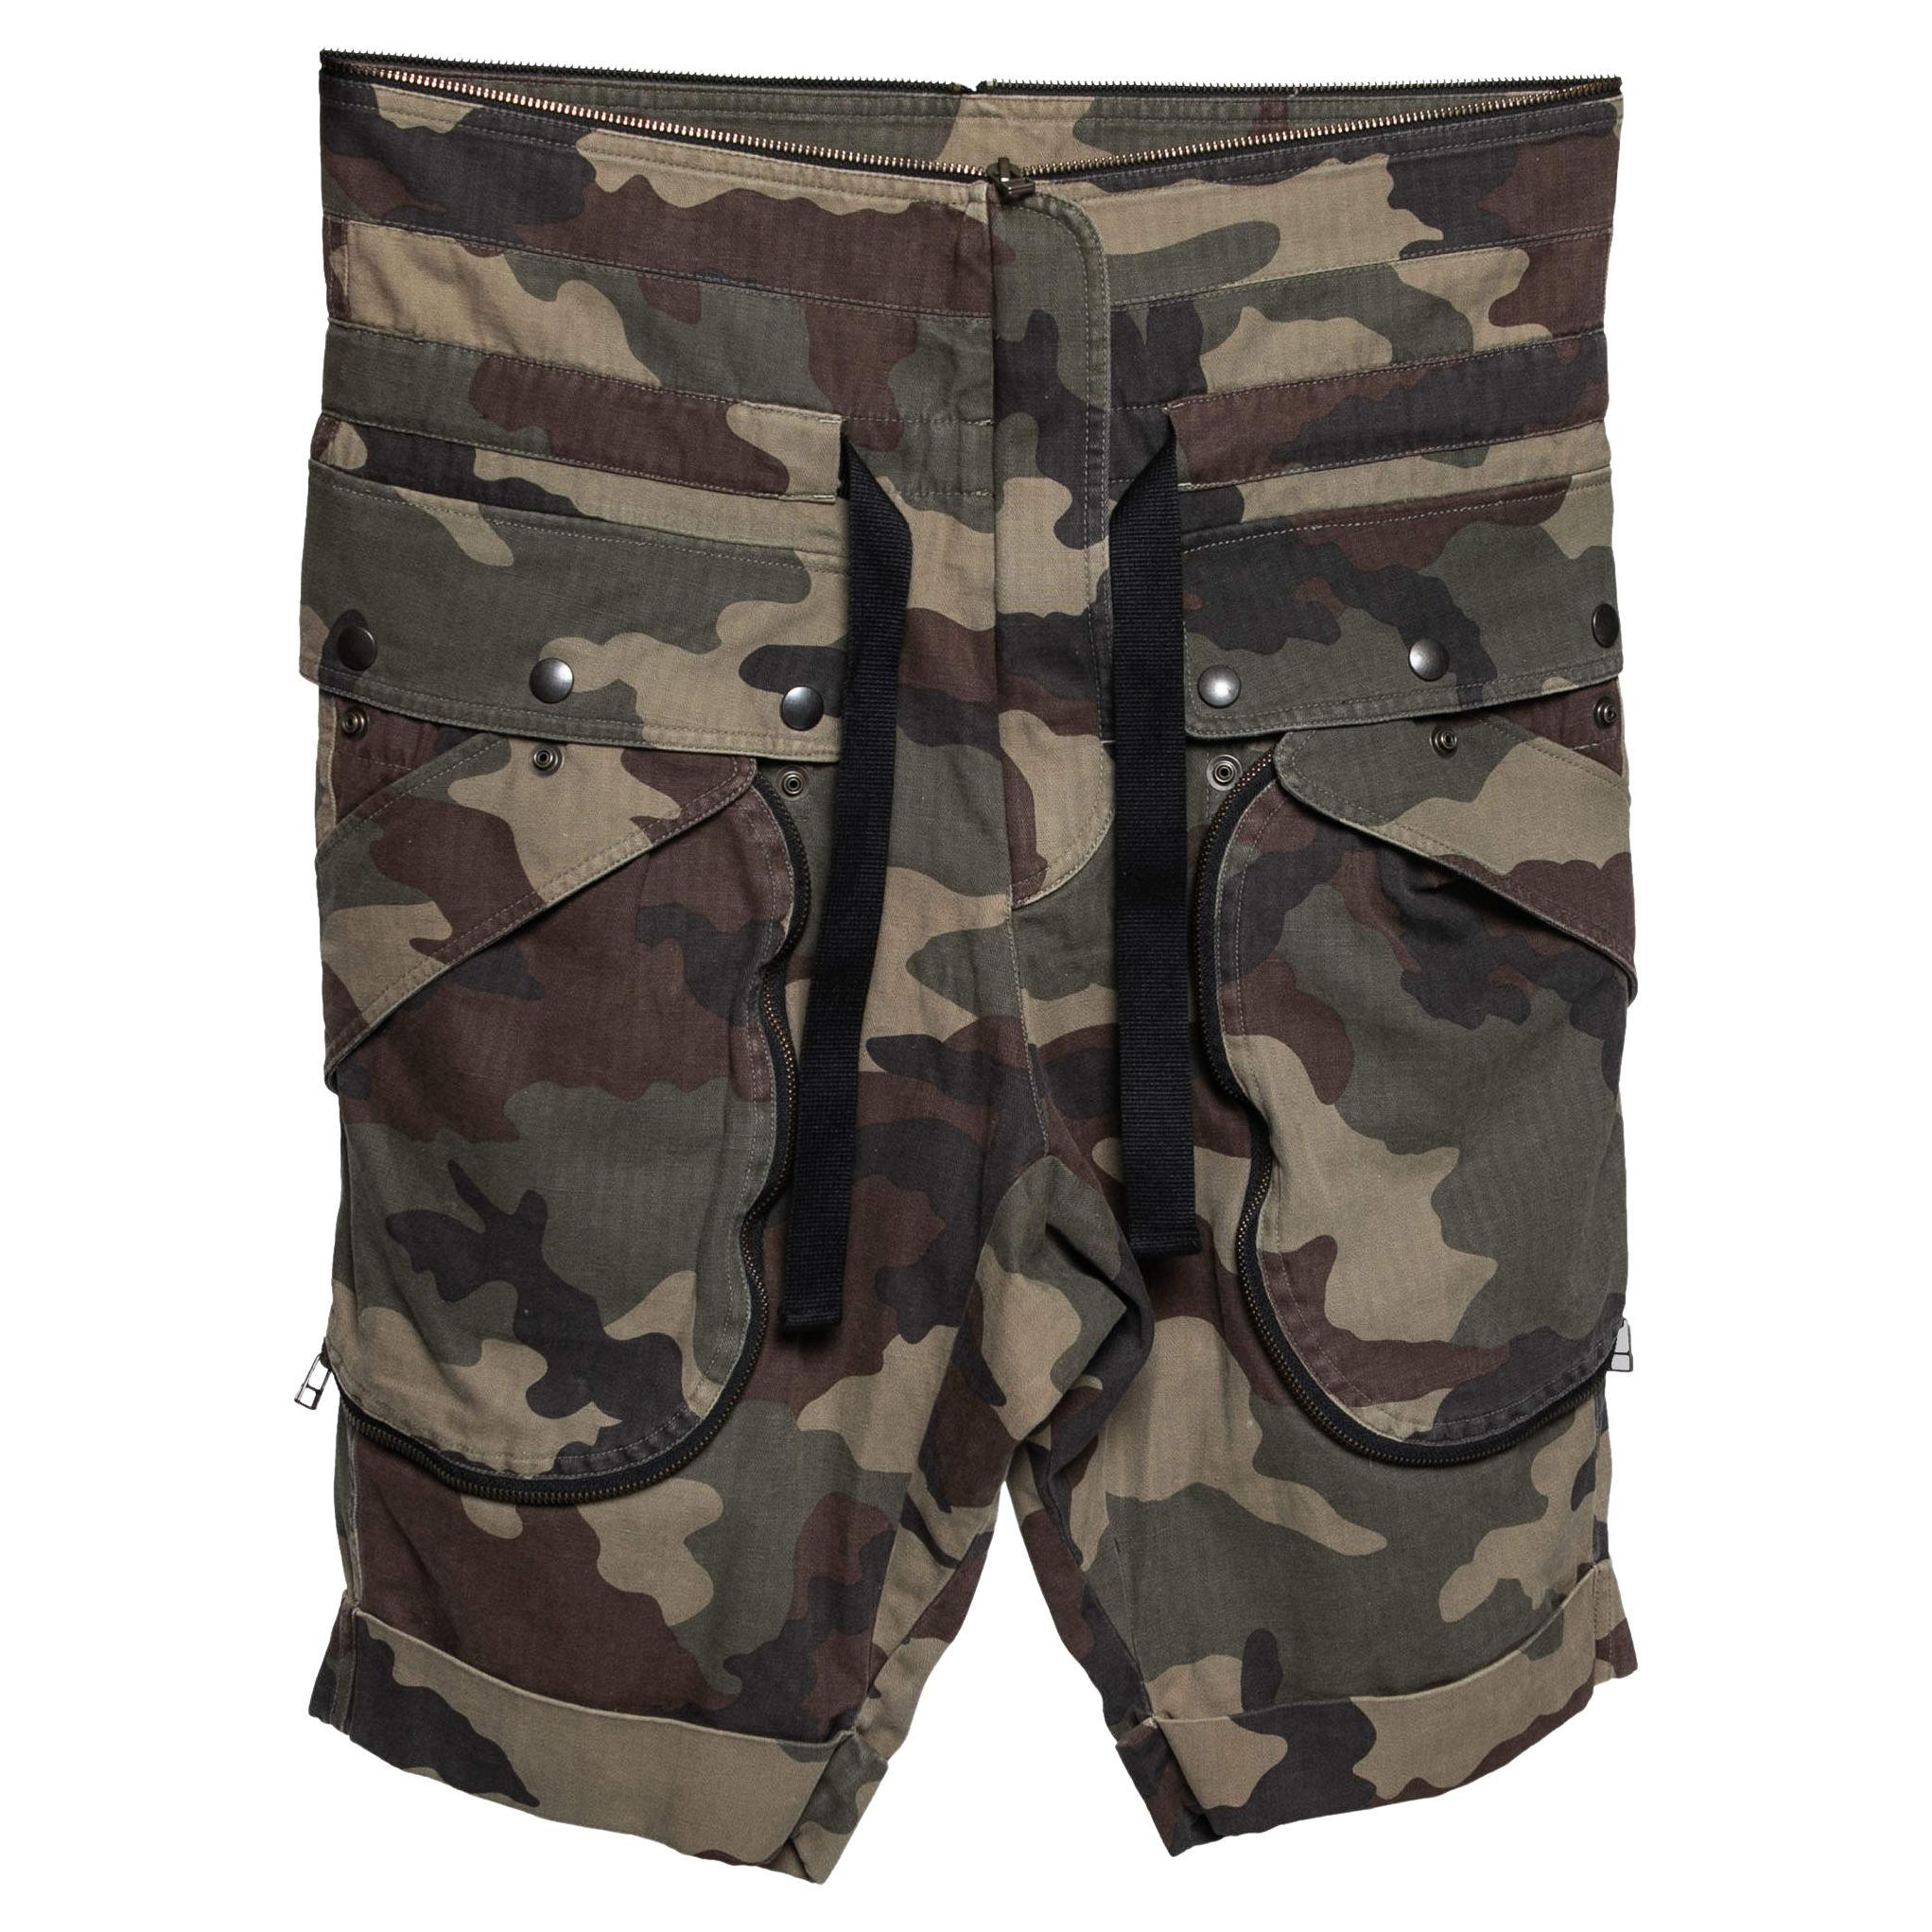 Faith Connexion Camouflage Printed Cotton Rolled Up Cuffs Shorts S For Sale